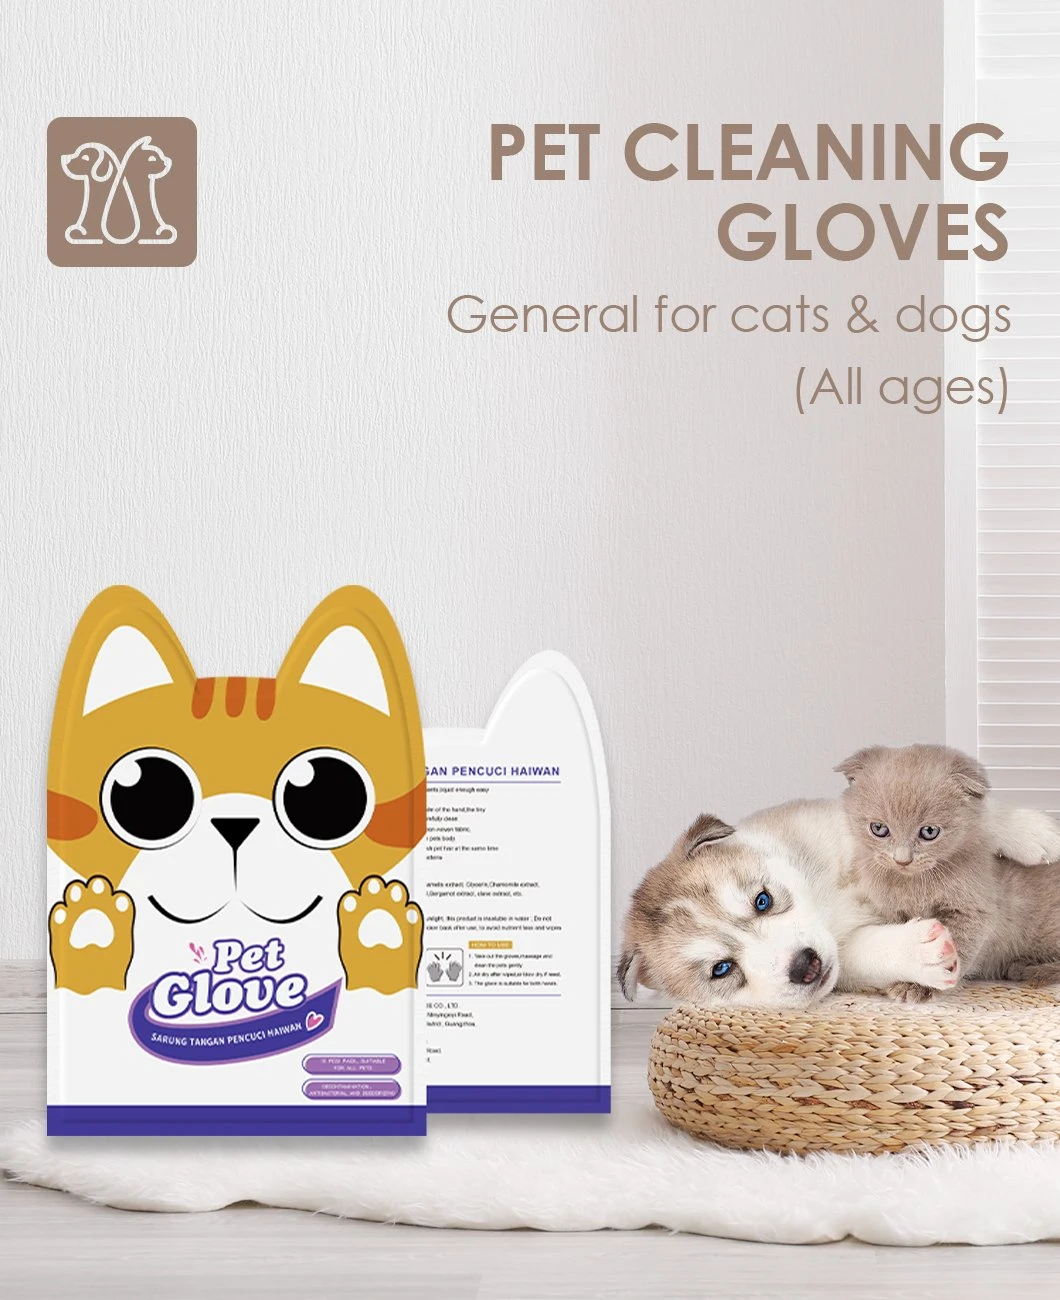 Bamboo Material Pet Organic Dental Eyes Ears Wet Wipes for Pet Daily Cleaning Super Soft 80 Counts Sustainable OEM Item